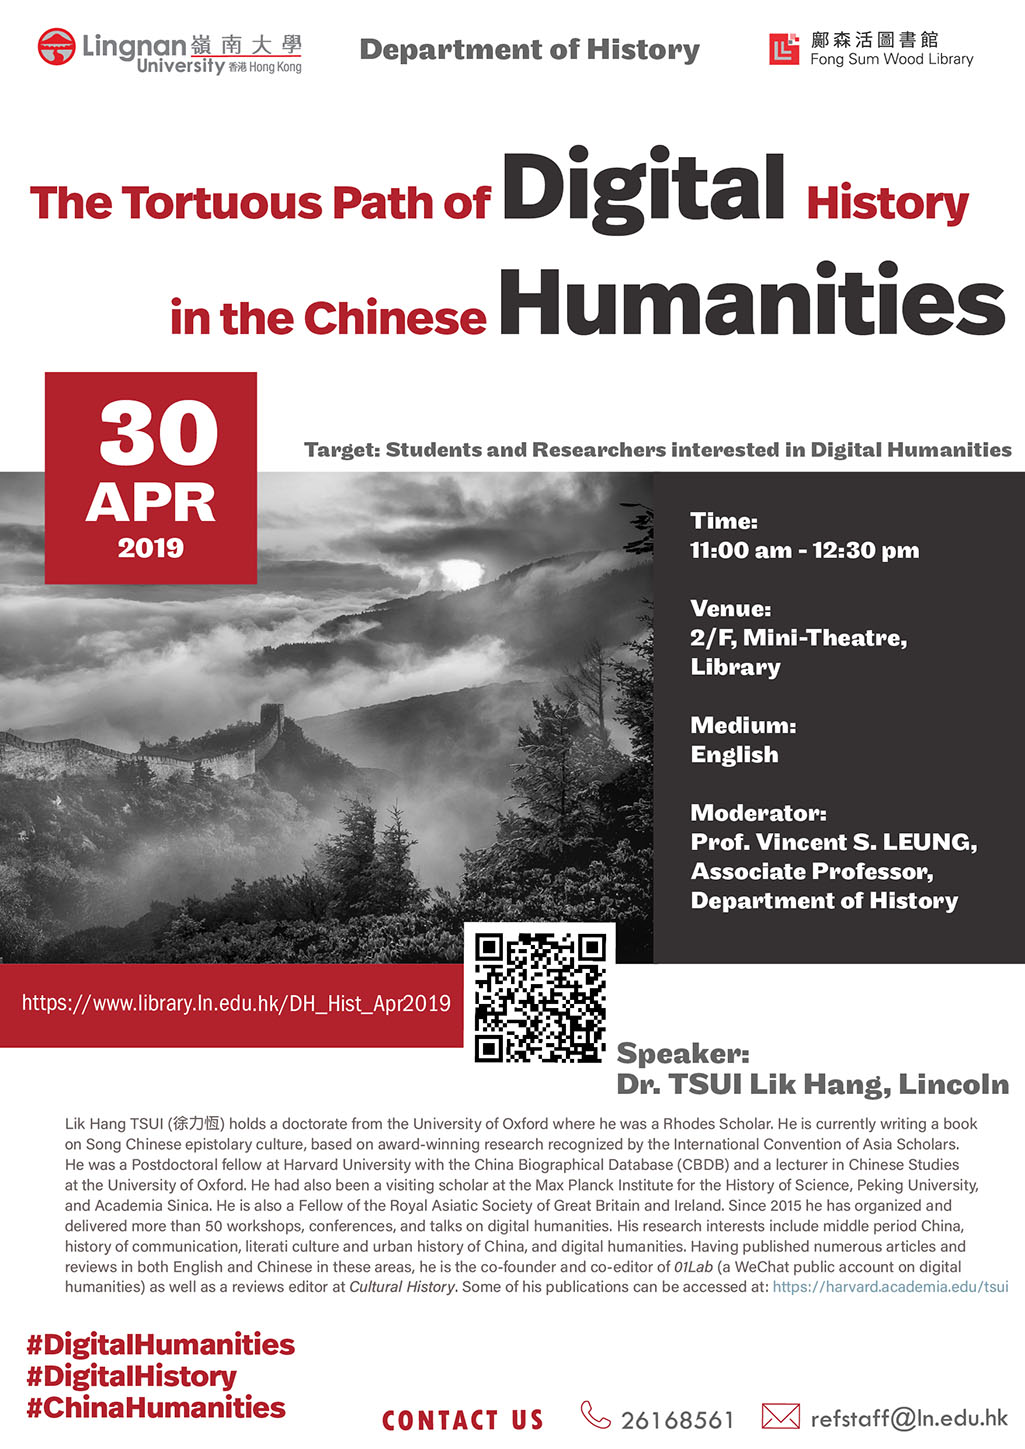 The Tortuous Path of Digital History in the Chinese Humanities